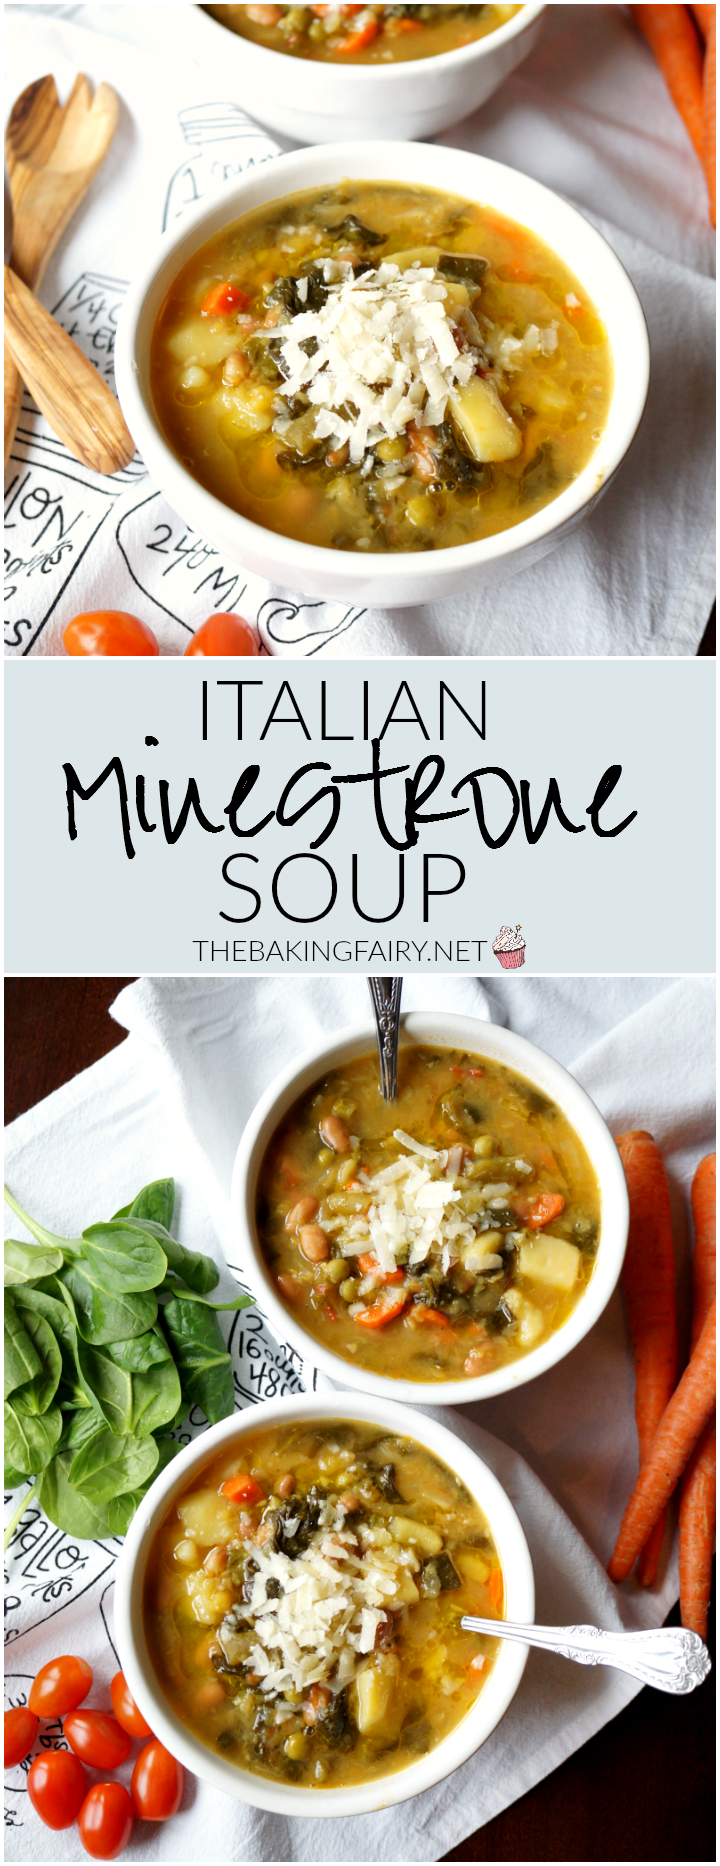 minestrone soup | The Baking Fairy